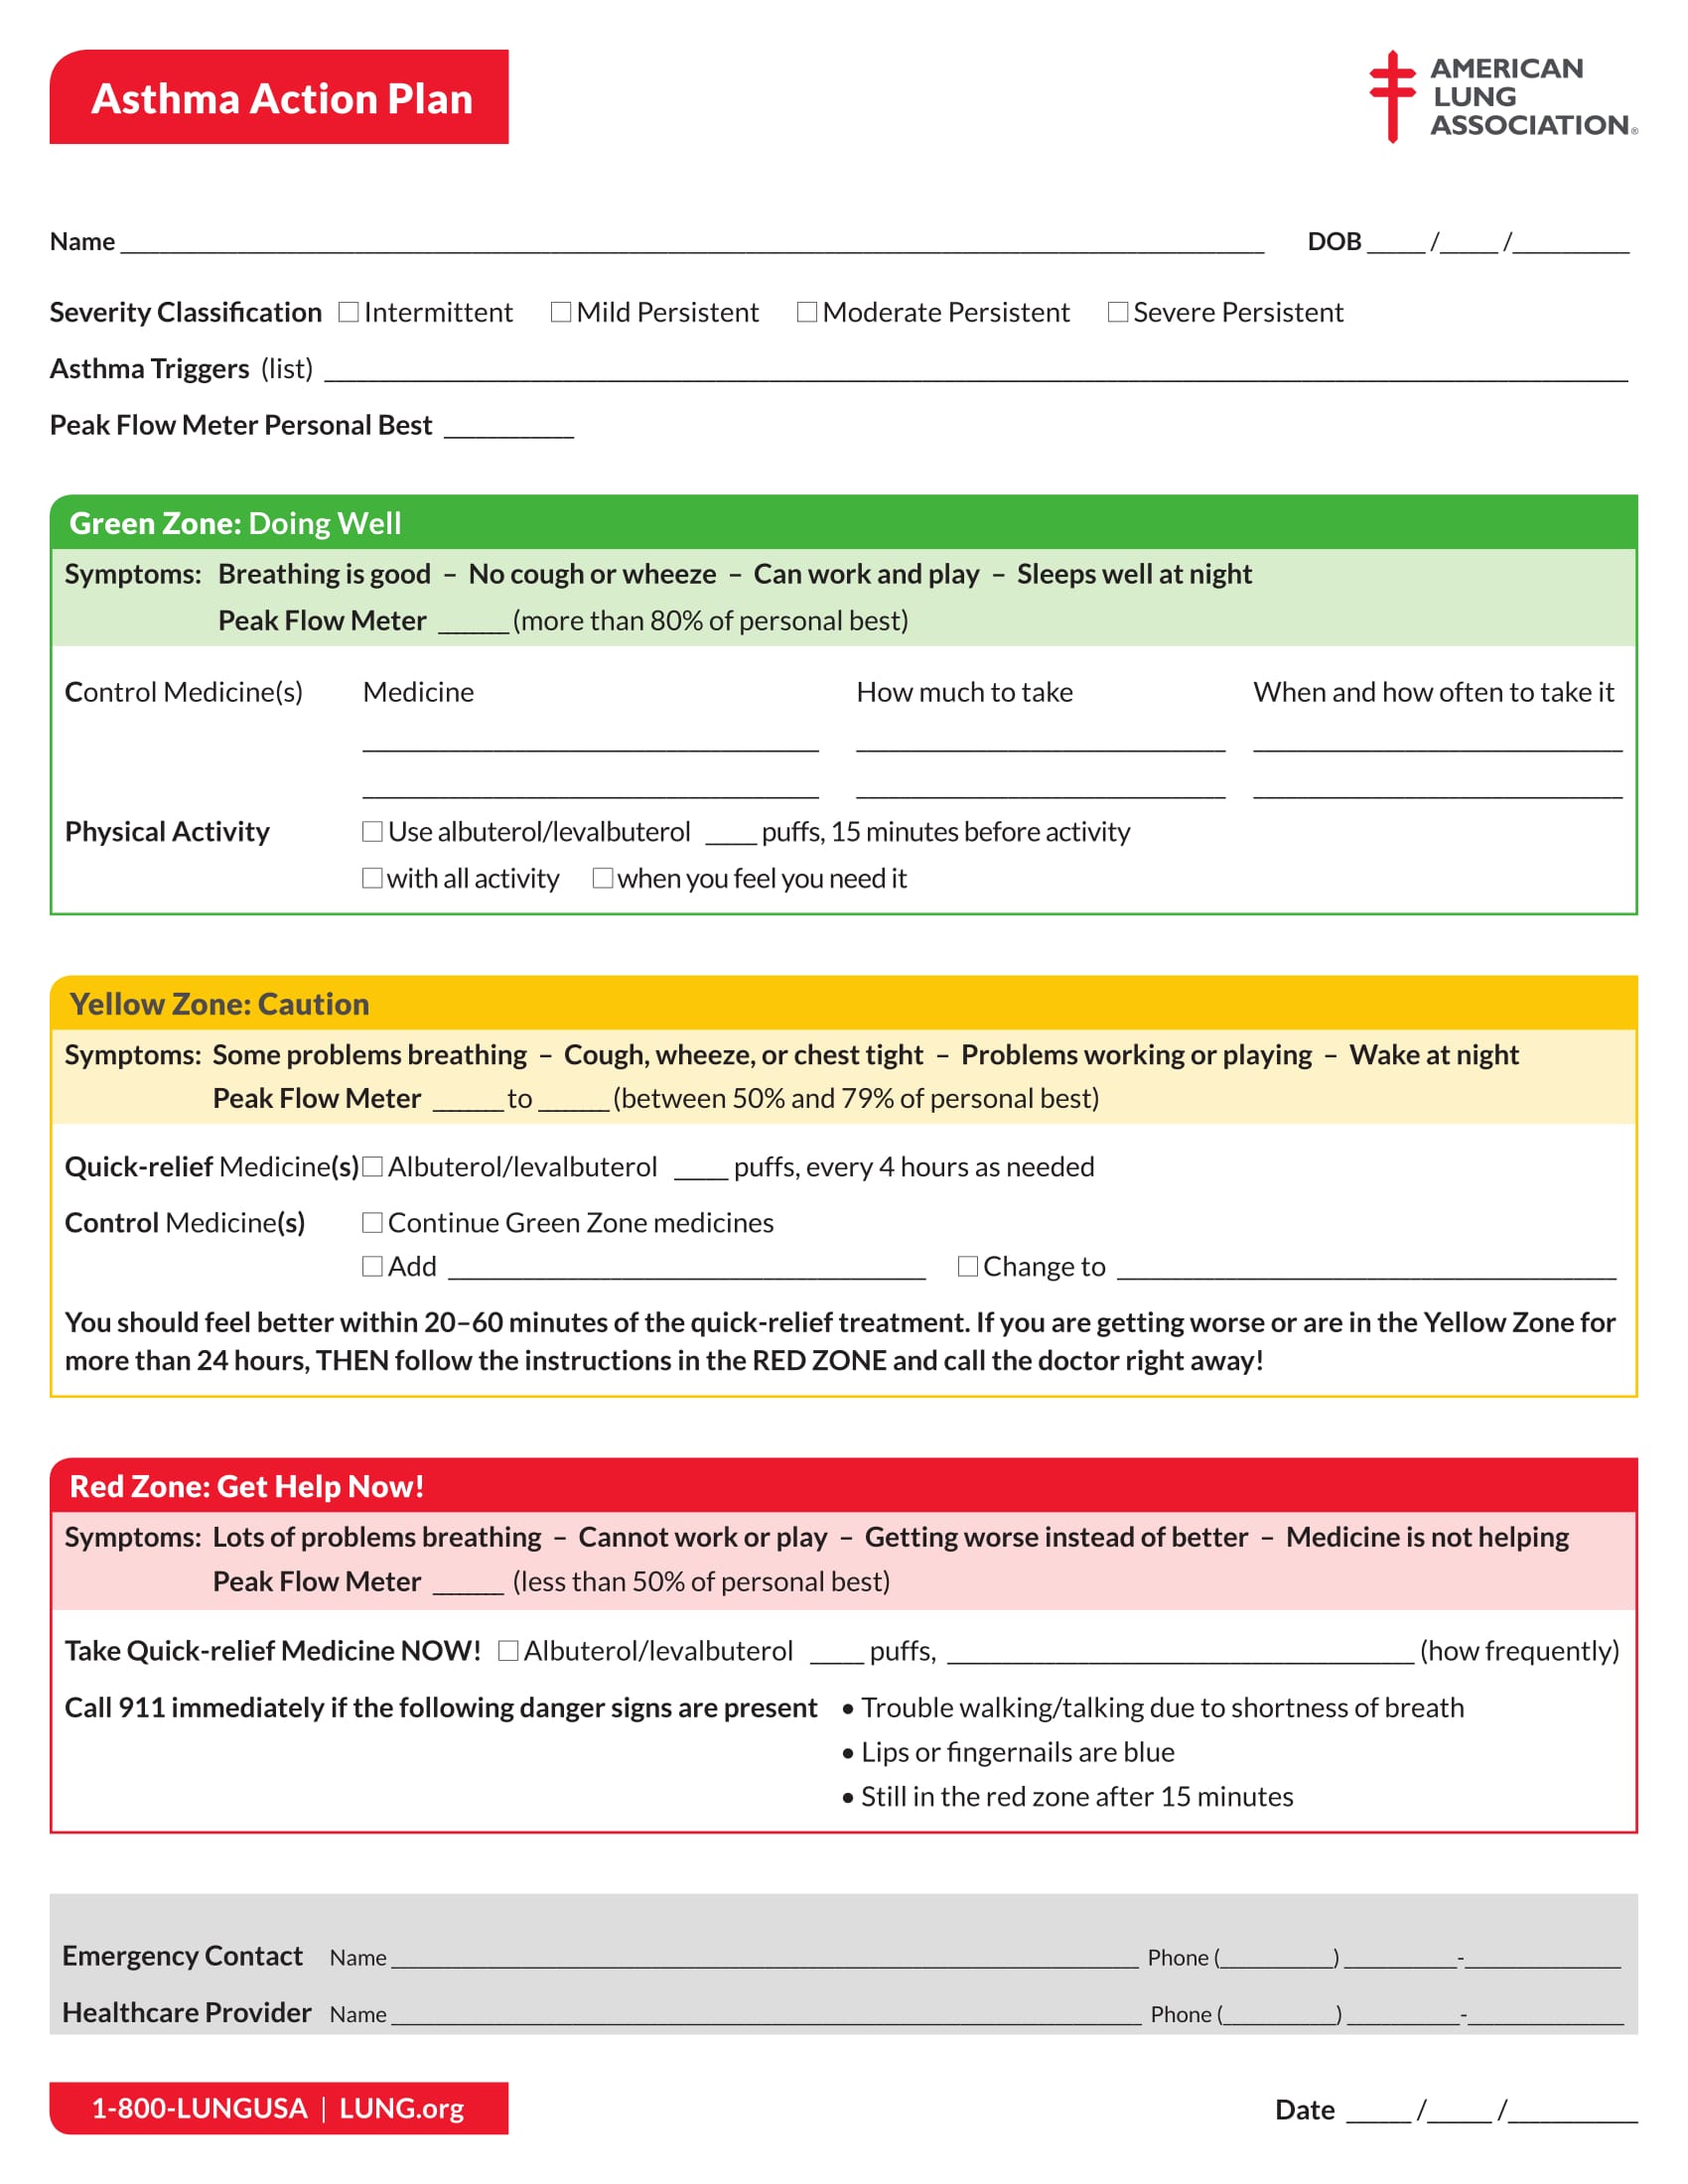 asthma action plan form 1